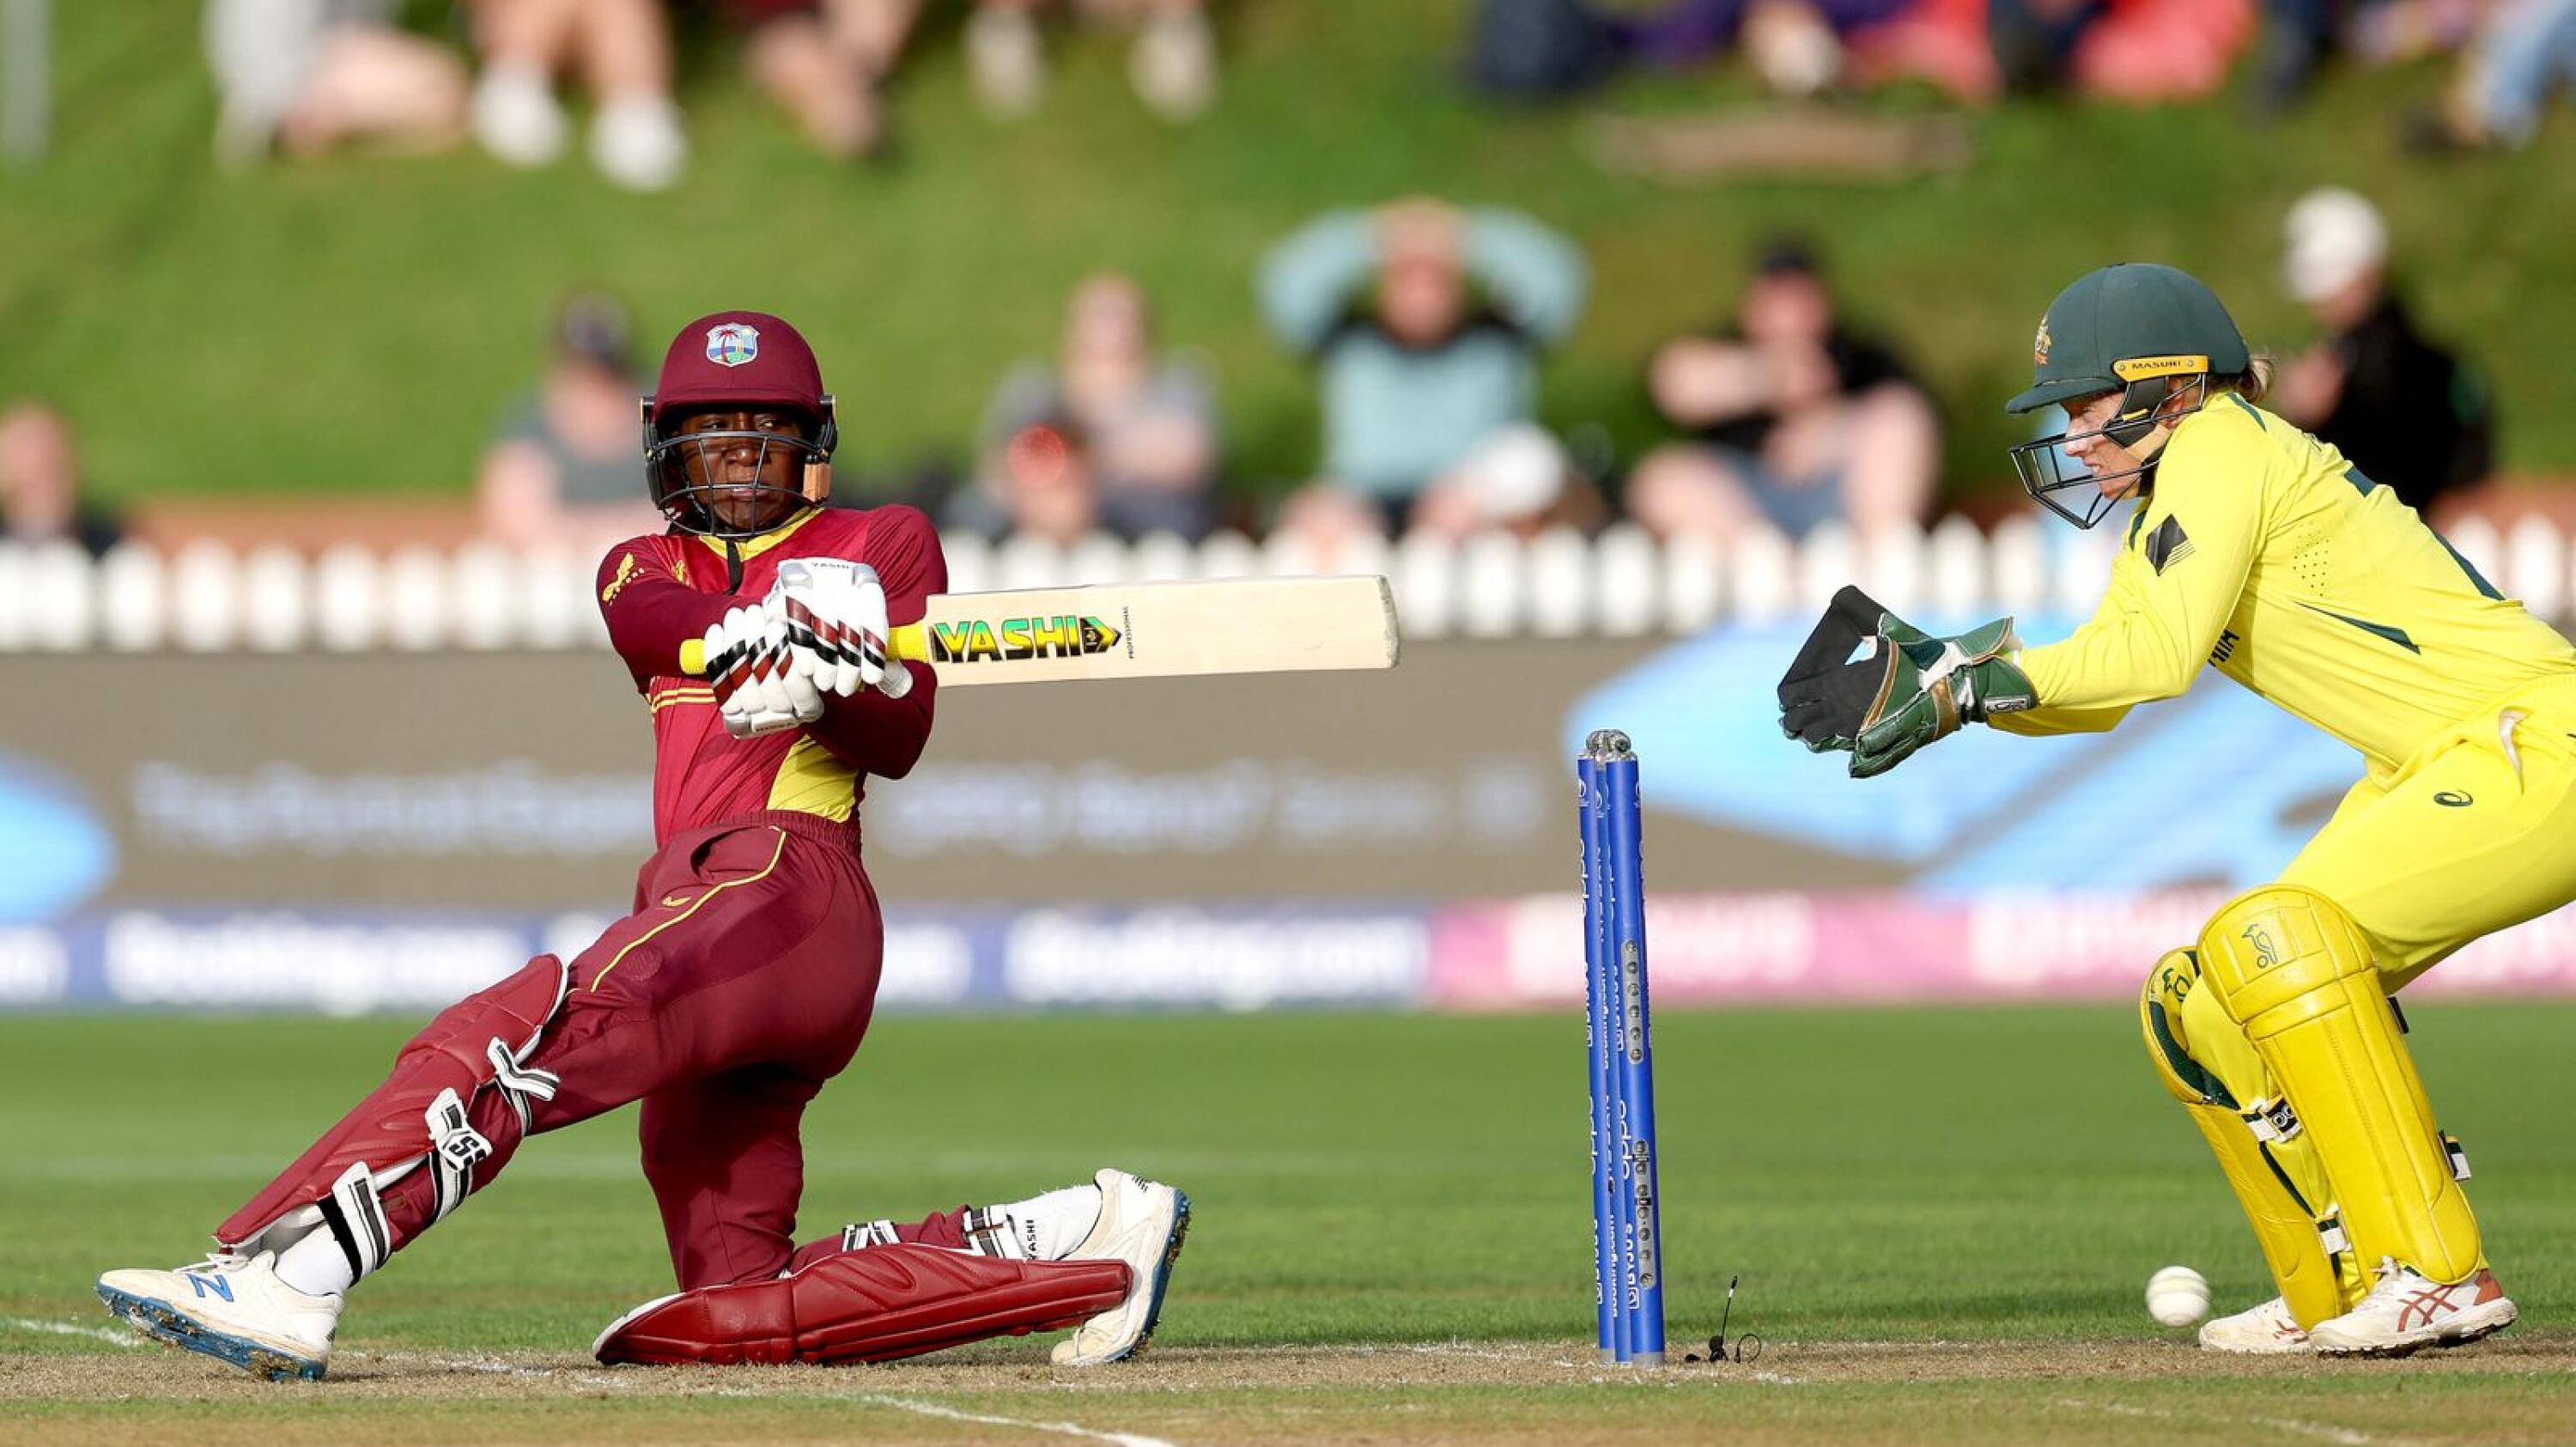 West Indies' captain Stafanie Taylor plays a shot watched by the Australia's wicketkeeper Alyssa Healy (R) during their Women's Cricket World Cup semi-final match at the Basin Reserve in Wellington